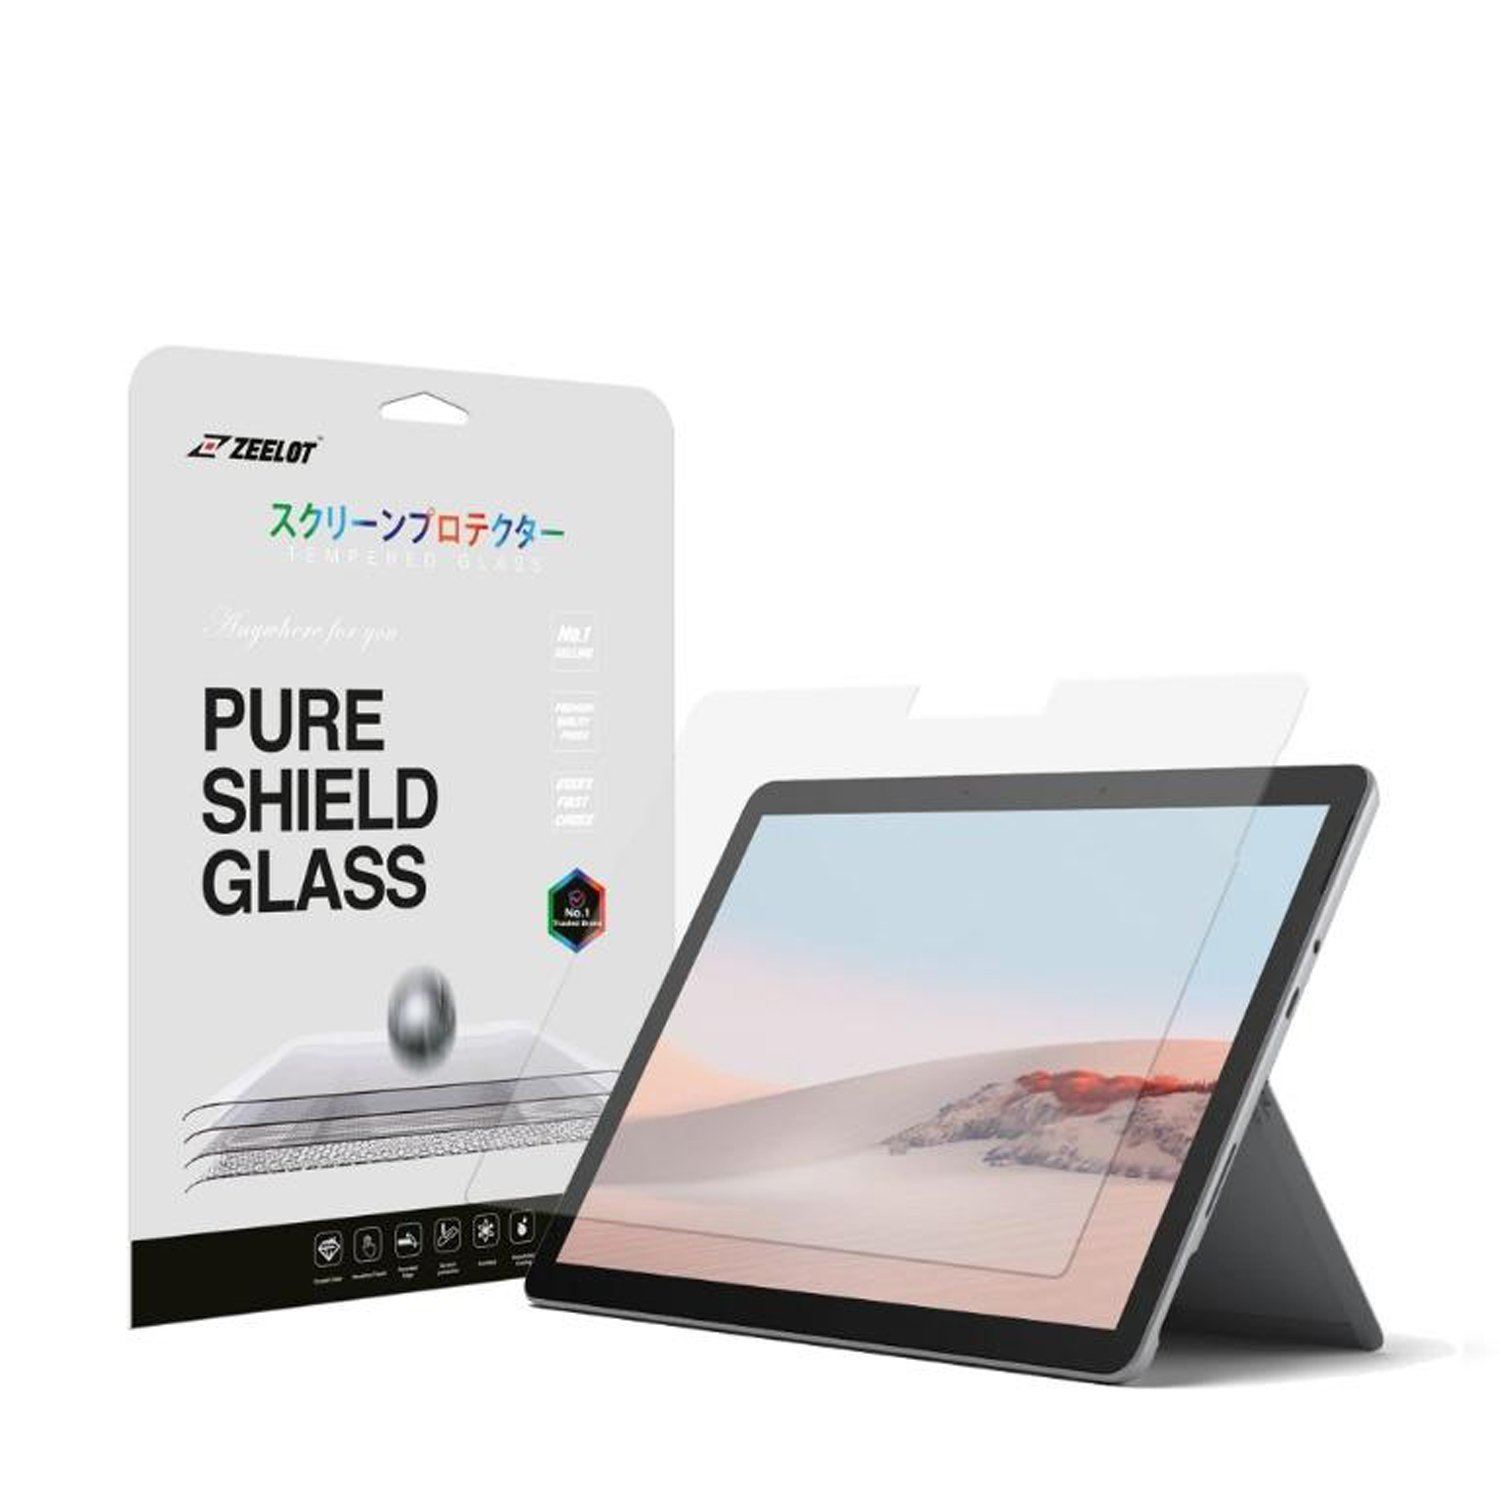 ZEELOT PureGlass 2.5D Tempered Glass Screen Protector for Microsoft Surface Pro 7 (2020), Clear Tempered Glass ZEELOT 